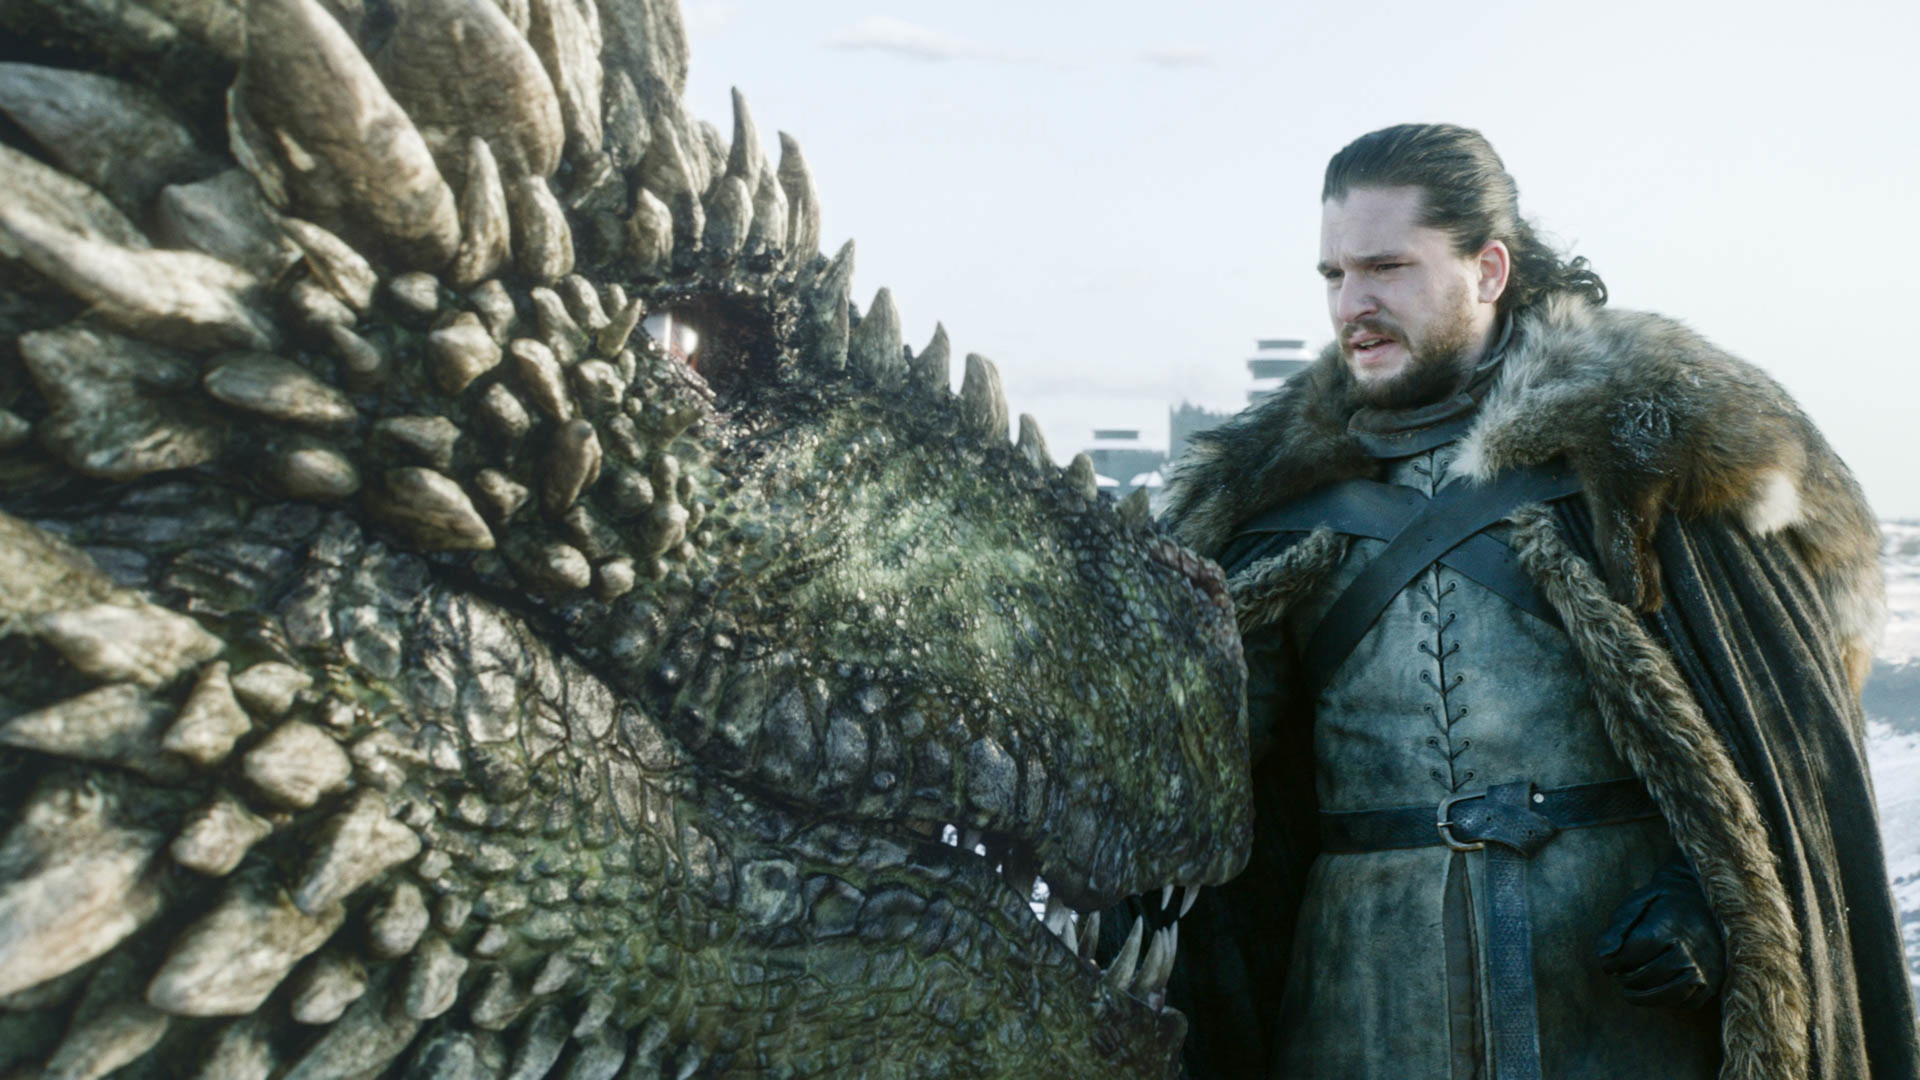 Jon Snow A Game of Thrones Story Release Date Rumors, Cast, Trailer